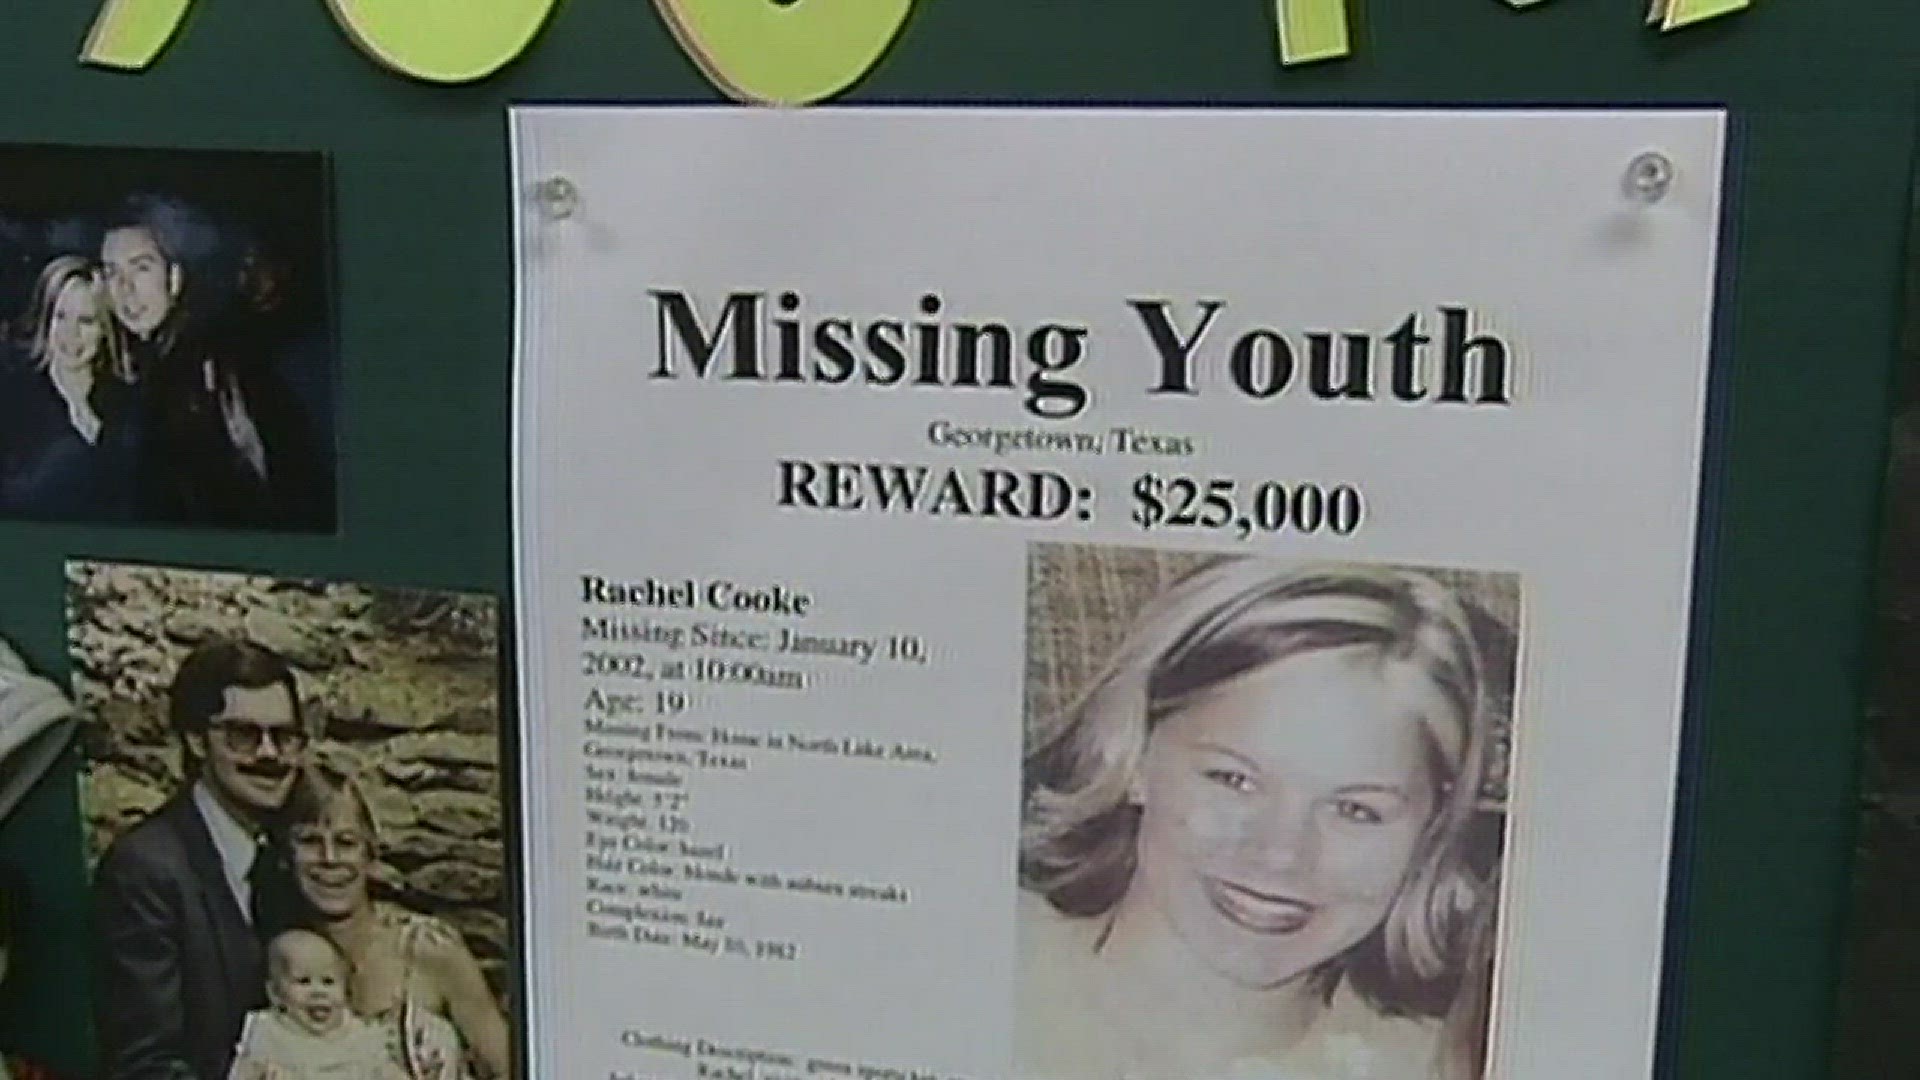 FBI and Williamson County authorities began searching an area near Liberty Hill on Friday after receiving a tip into the January 2002 disappearance of 19-year-old Rachel Cooke.